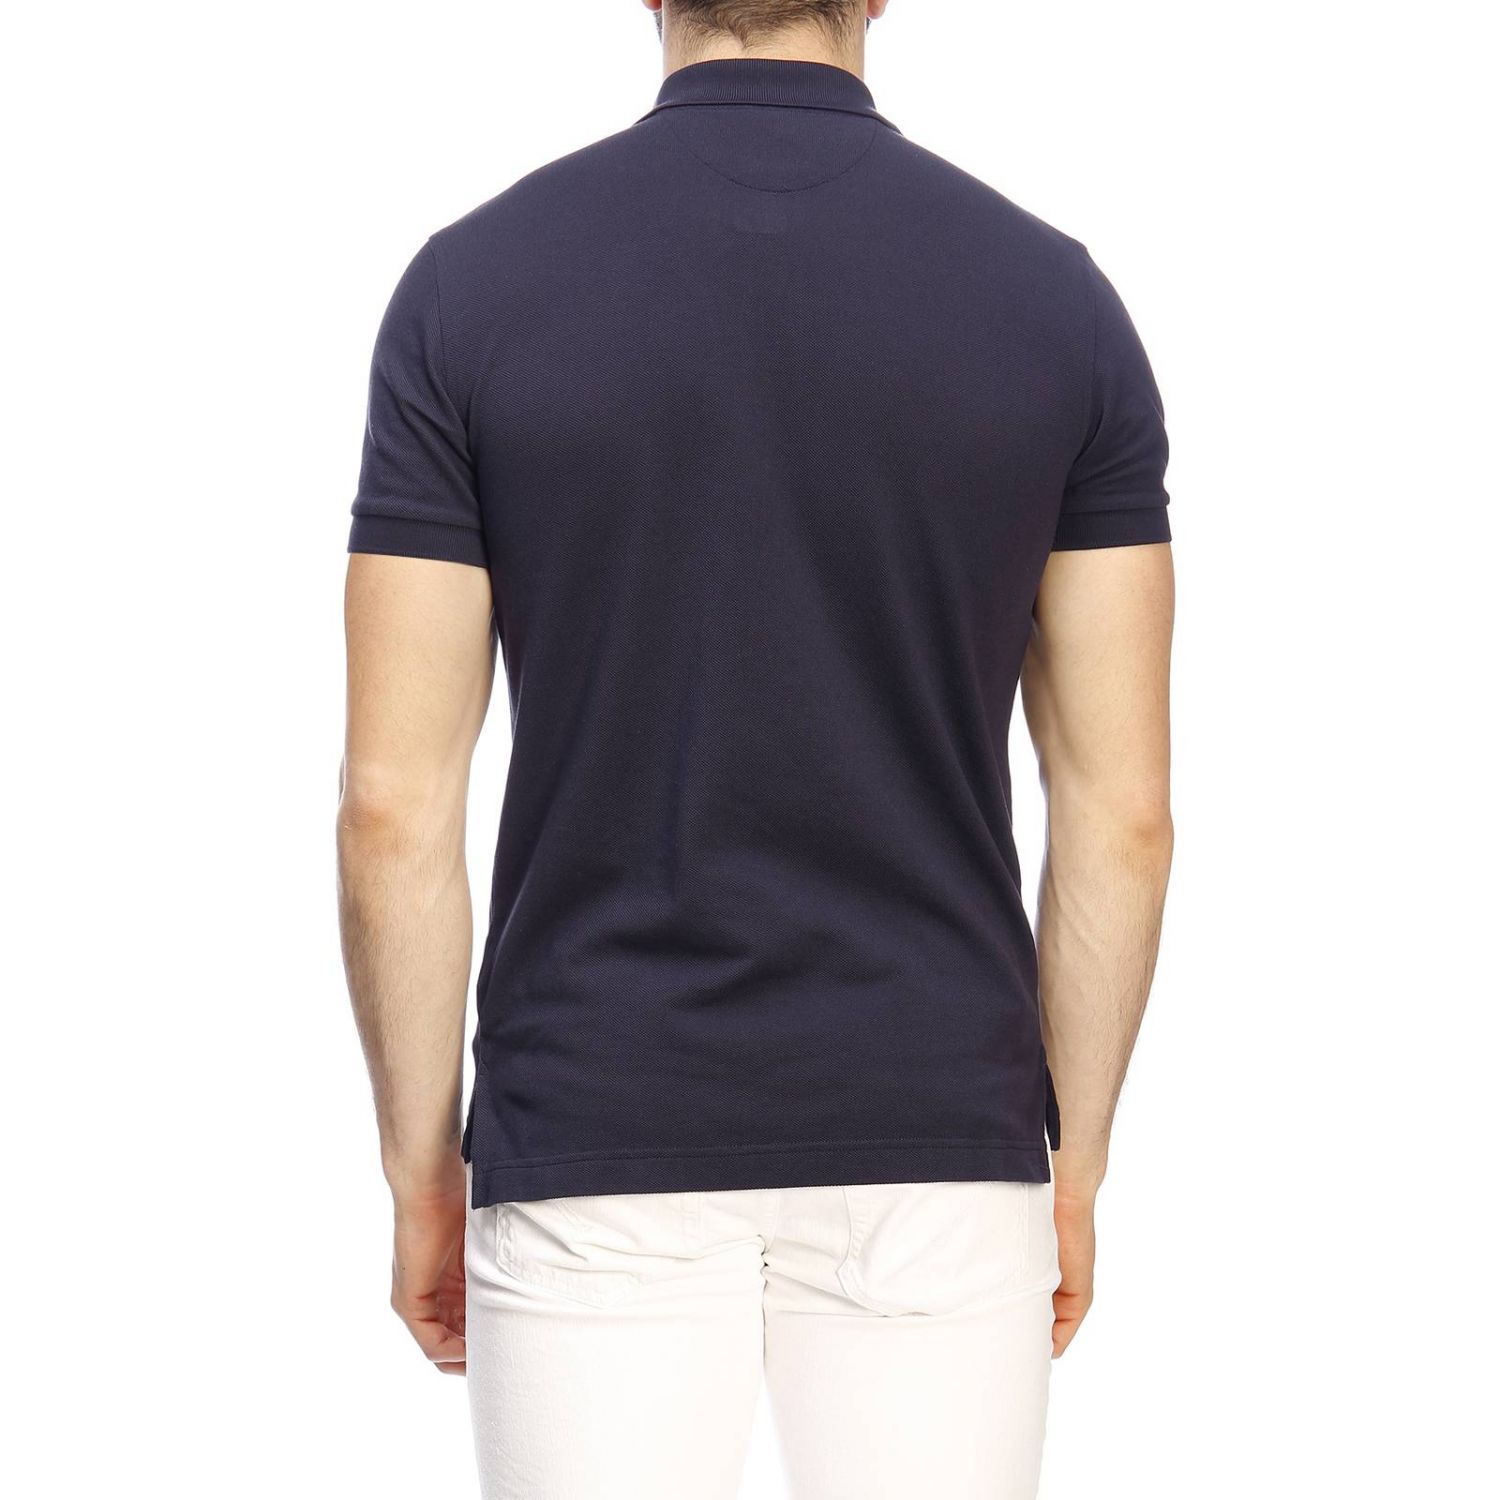 Brooks Brothers Outlet: T-shirt men - Navy | T-Shirt Brooks Brothers ...